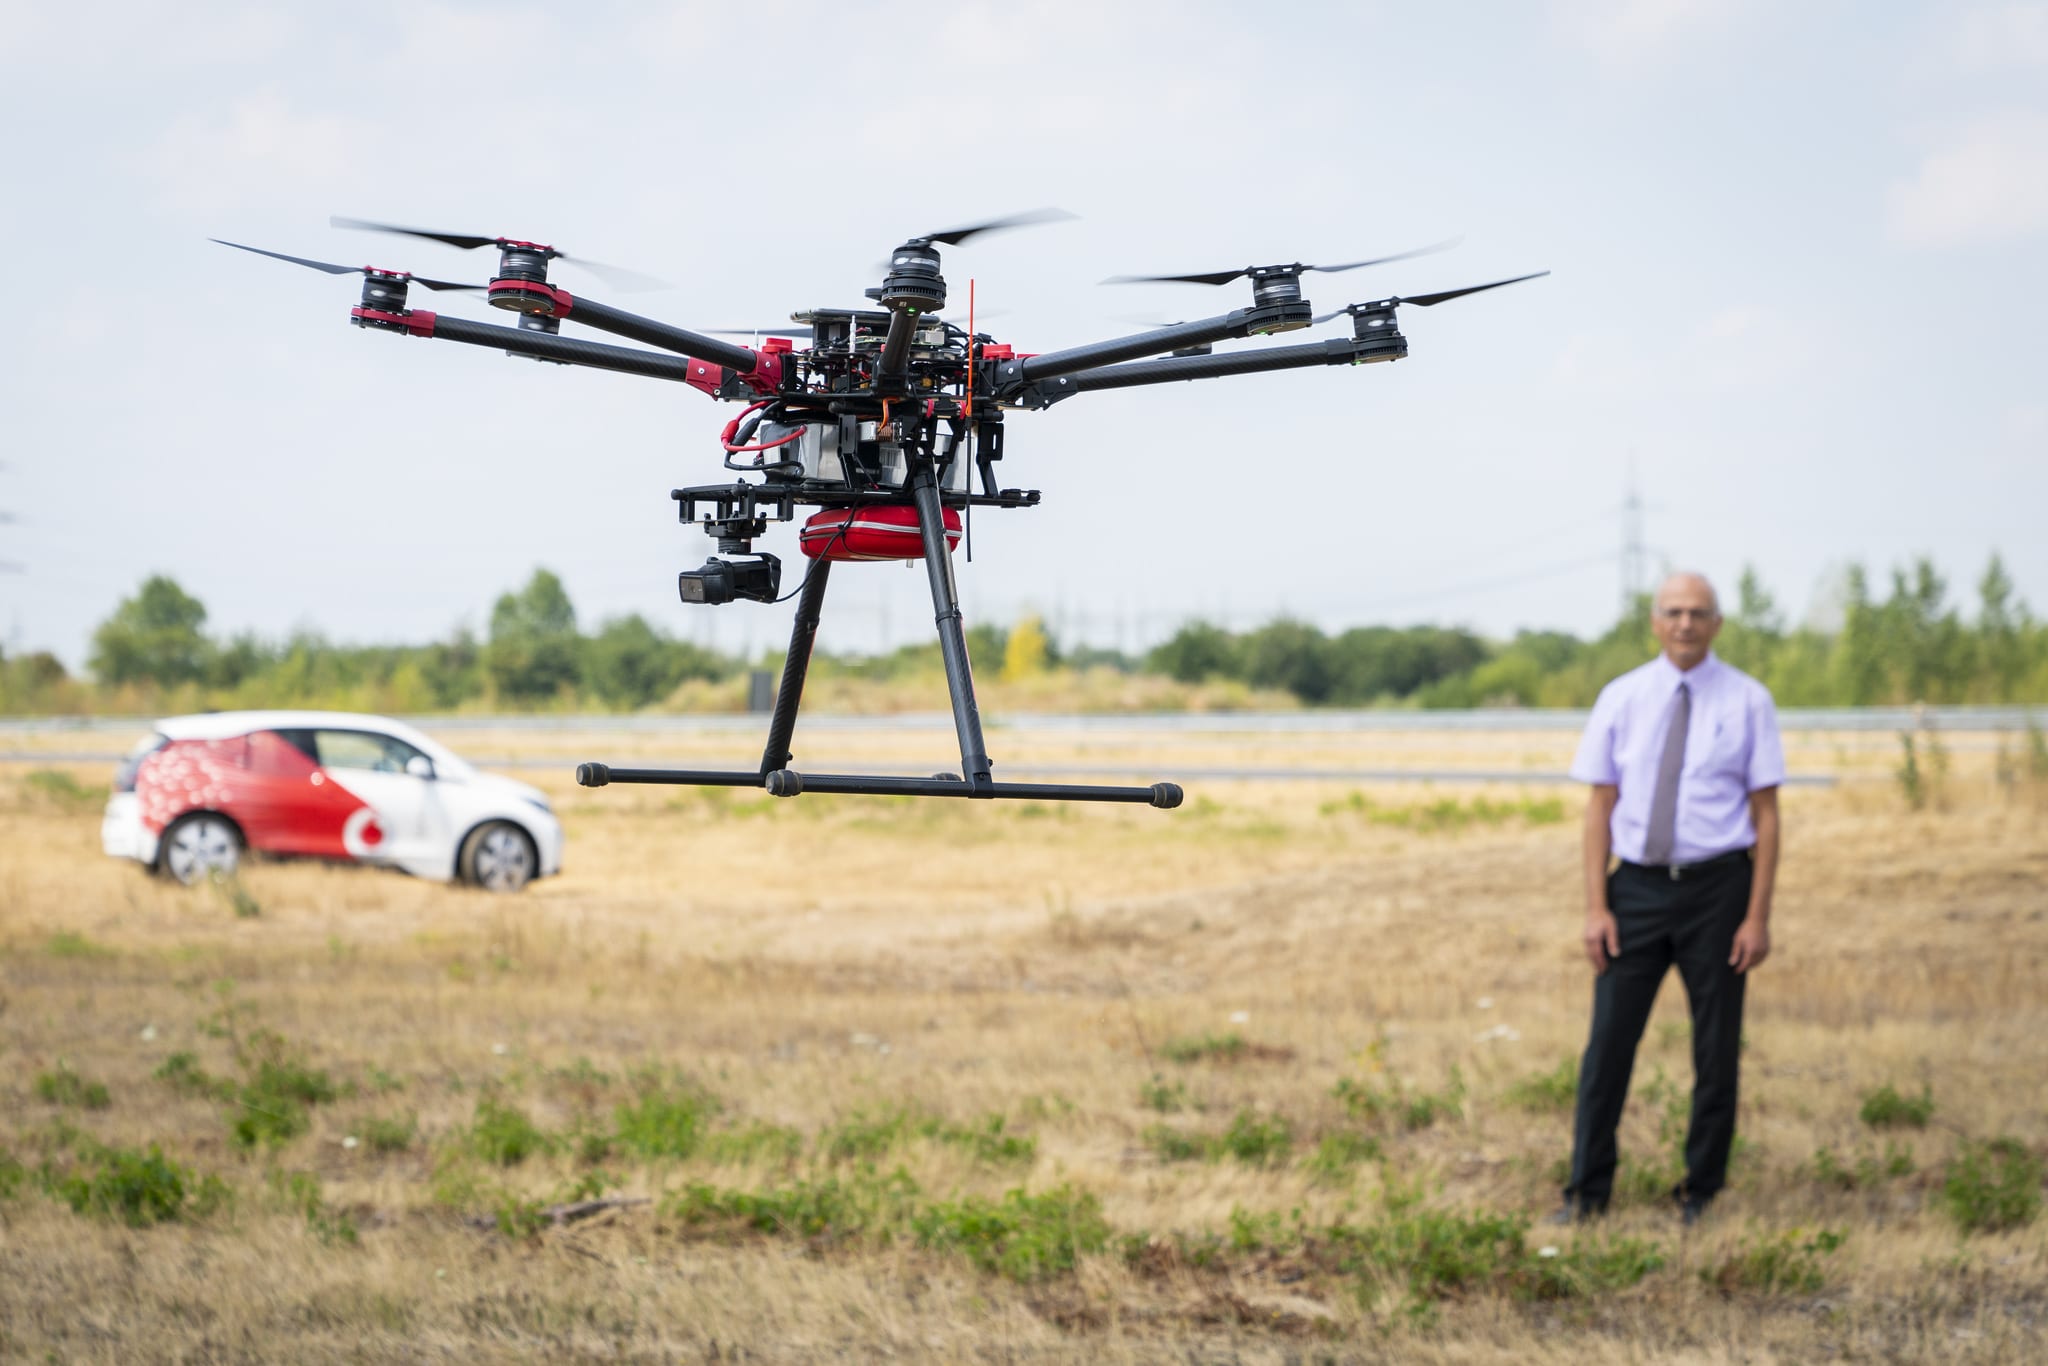 In the first trial of its kind in Europe, Vodafone Group, the world leader in Internet of Things services for business, has successfully demonstrated how mobile networks could support the European’s Commission’s vision of safe long distance drone flights. Credit: Vodafone Germay